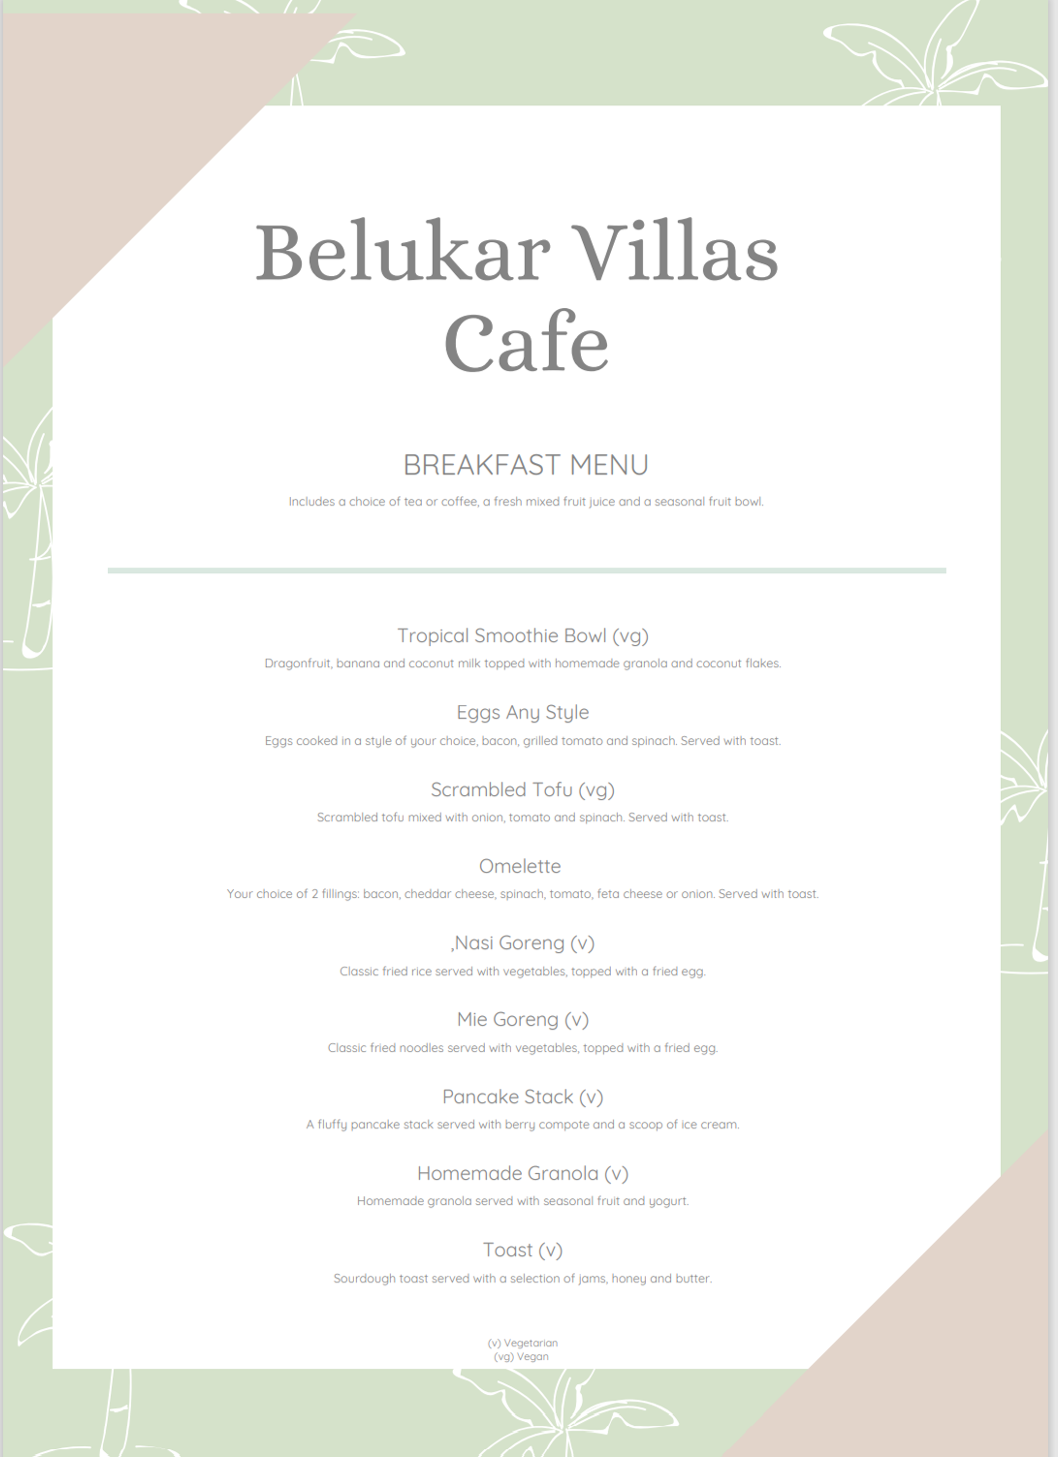 https://cloudmixer.gracepl.us/sites/belukarvillas.com/files/pictures/Cafe%20and%20menu/Cafe%20page%206.png